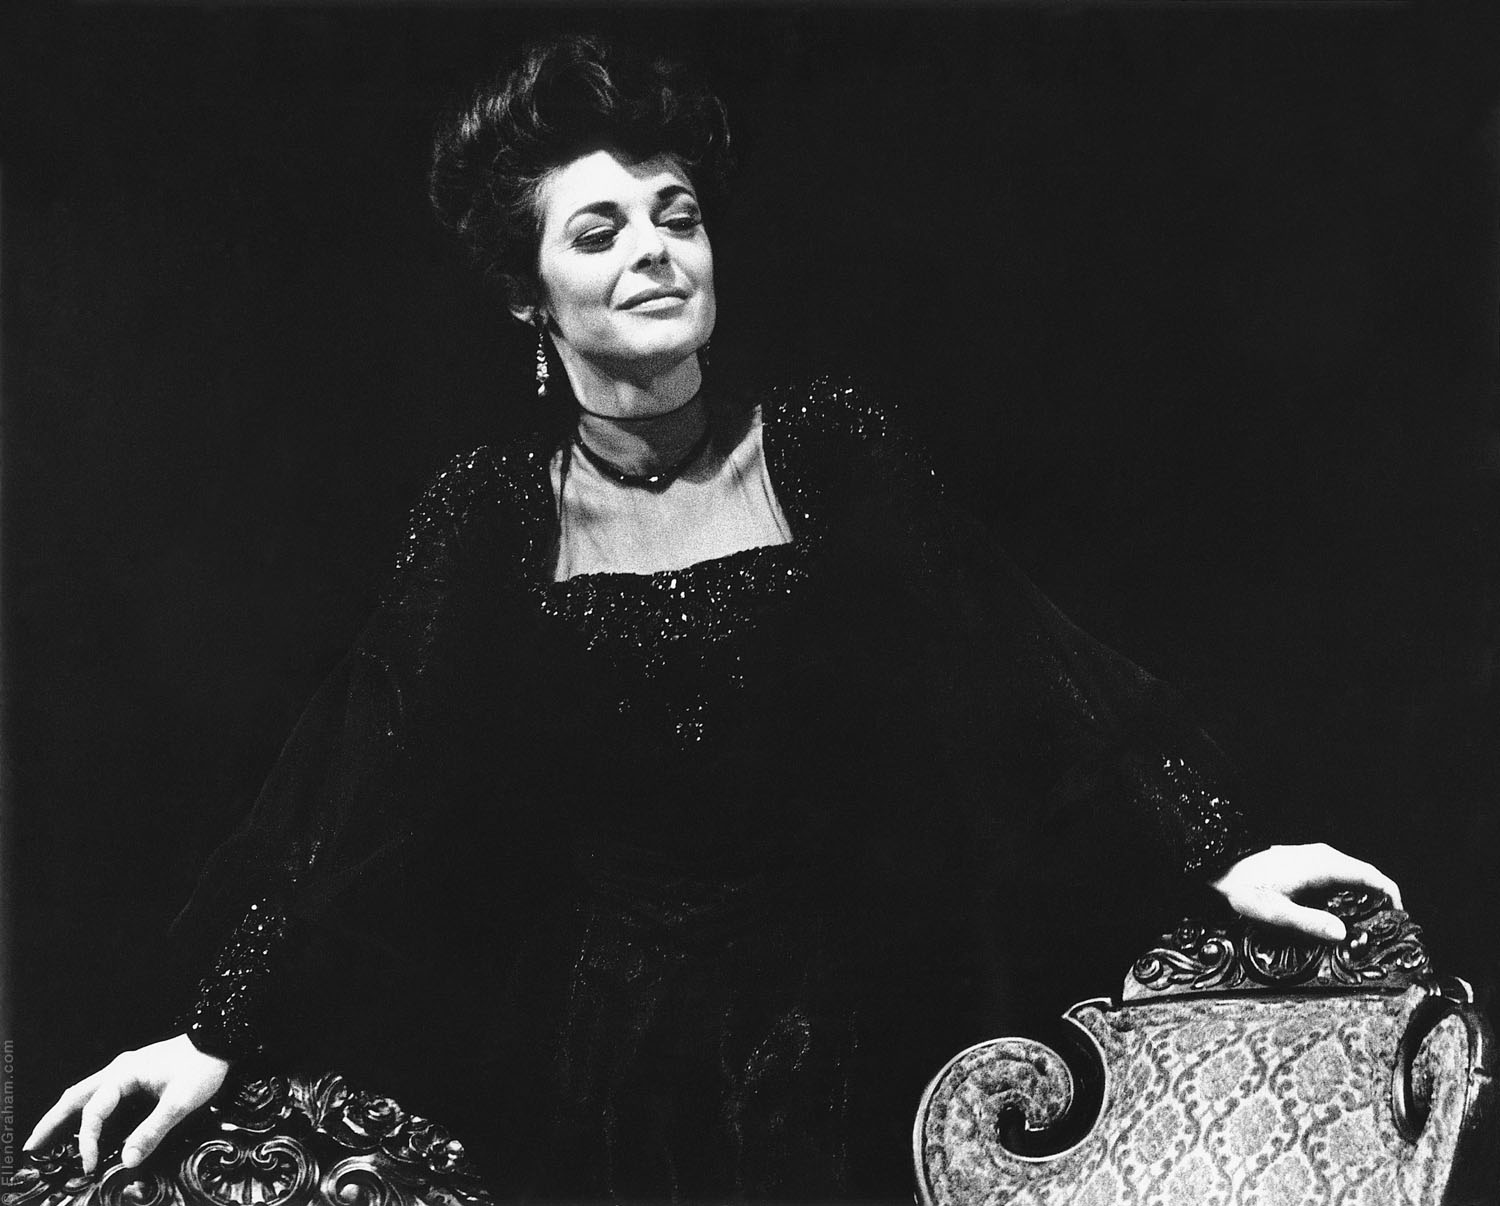 Anne Bancroft, "The Little Foxes," New York, NY, 1967